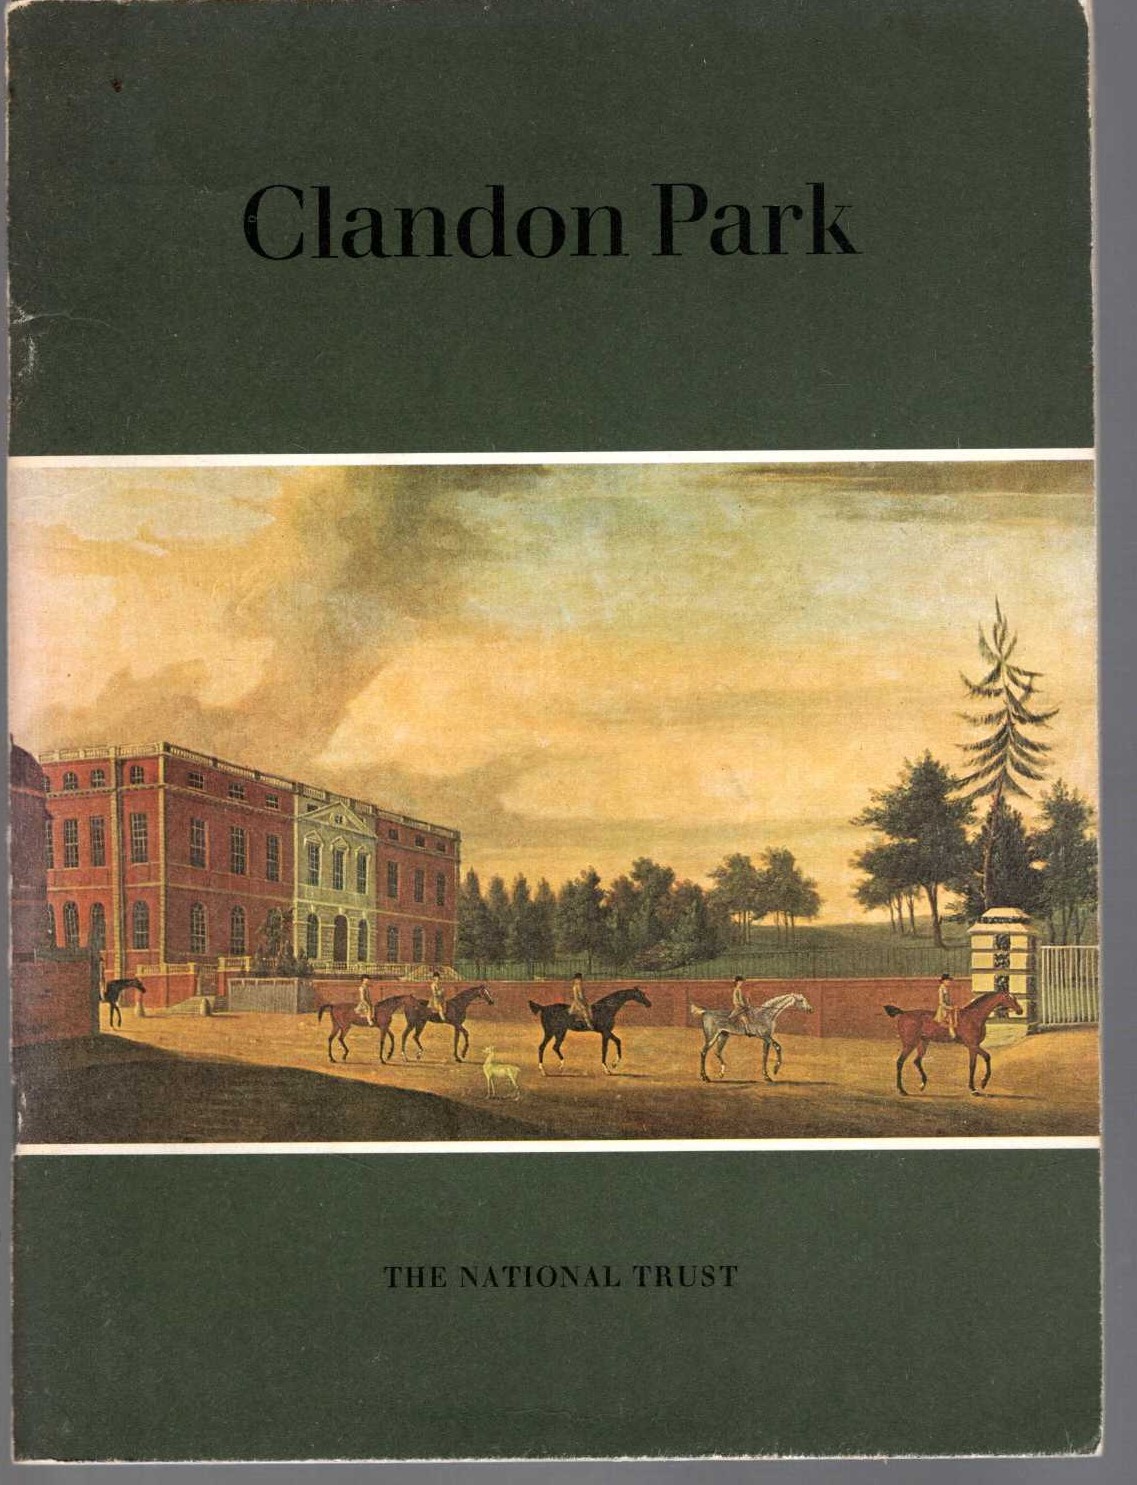 
\ CLANDON PARK by The National Trust front book cover image